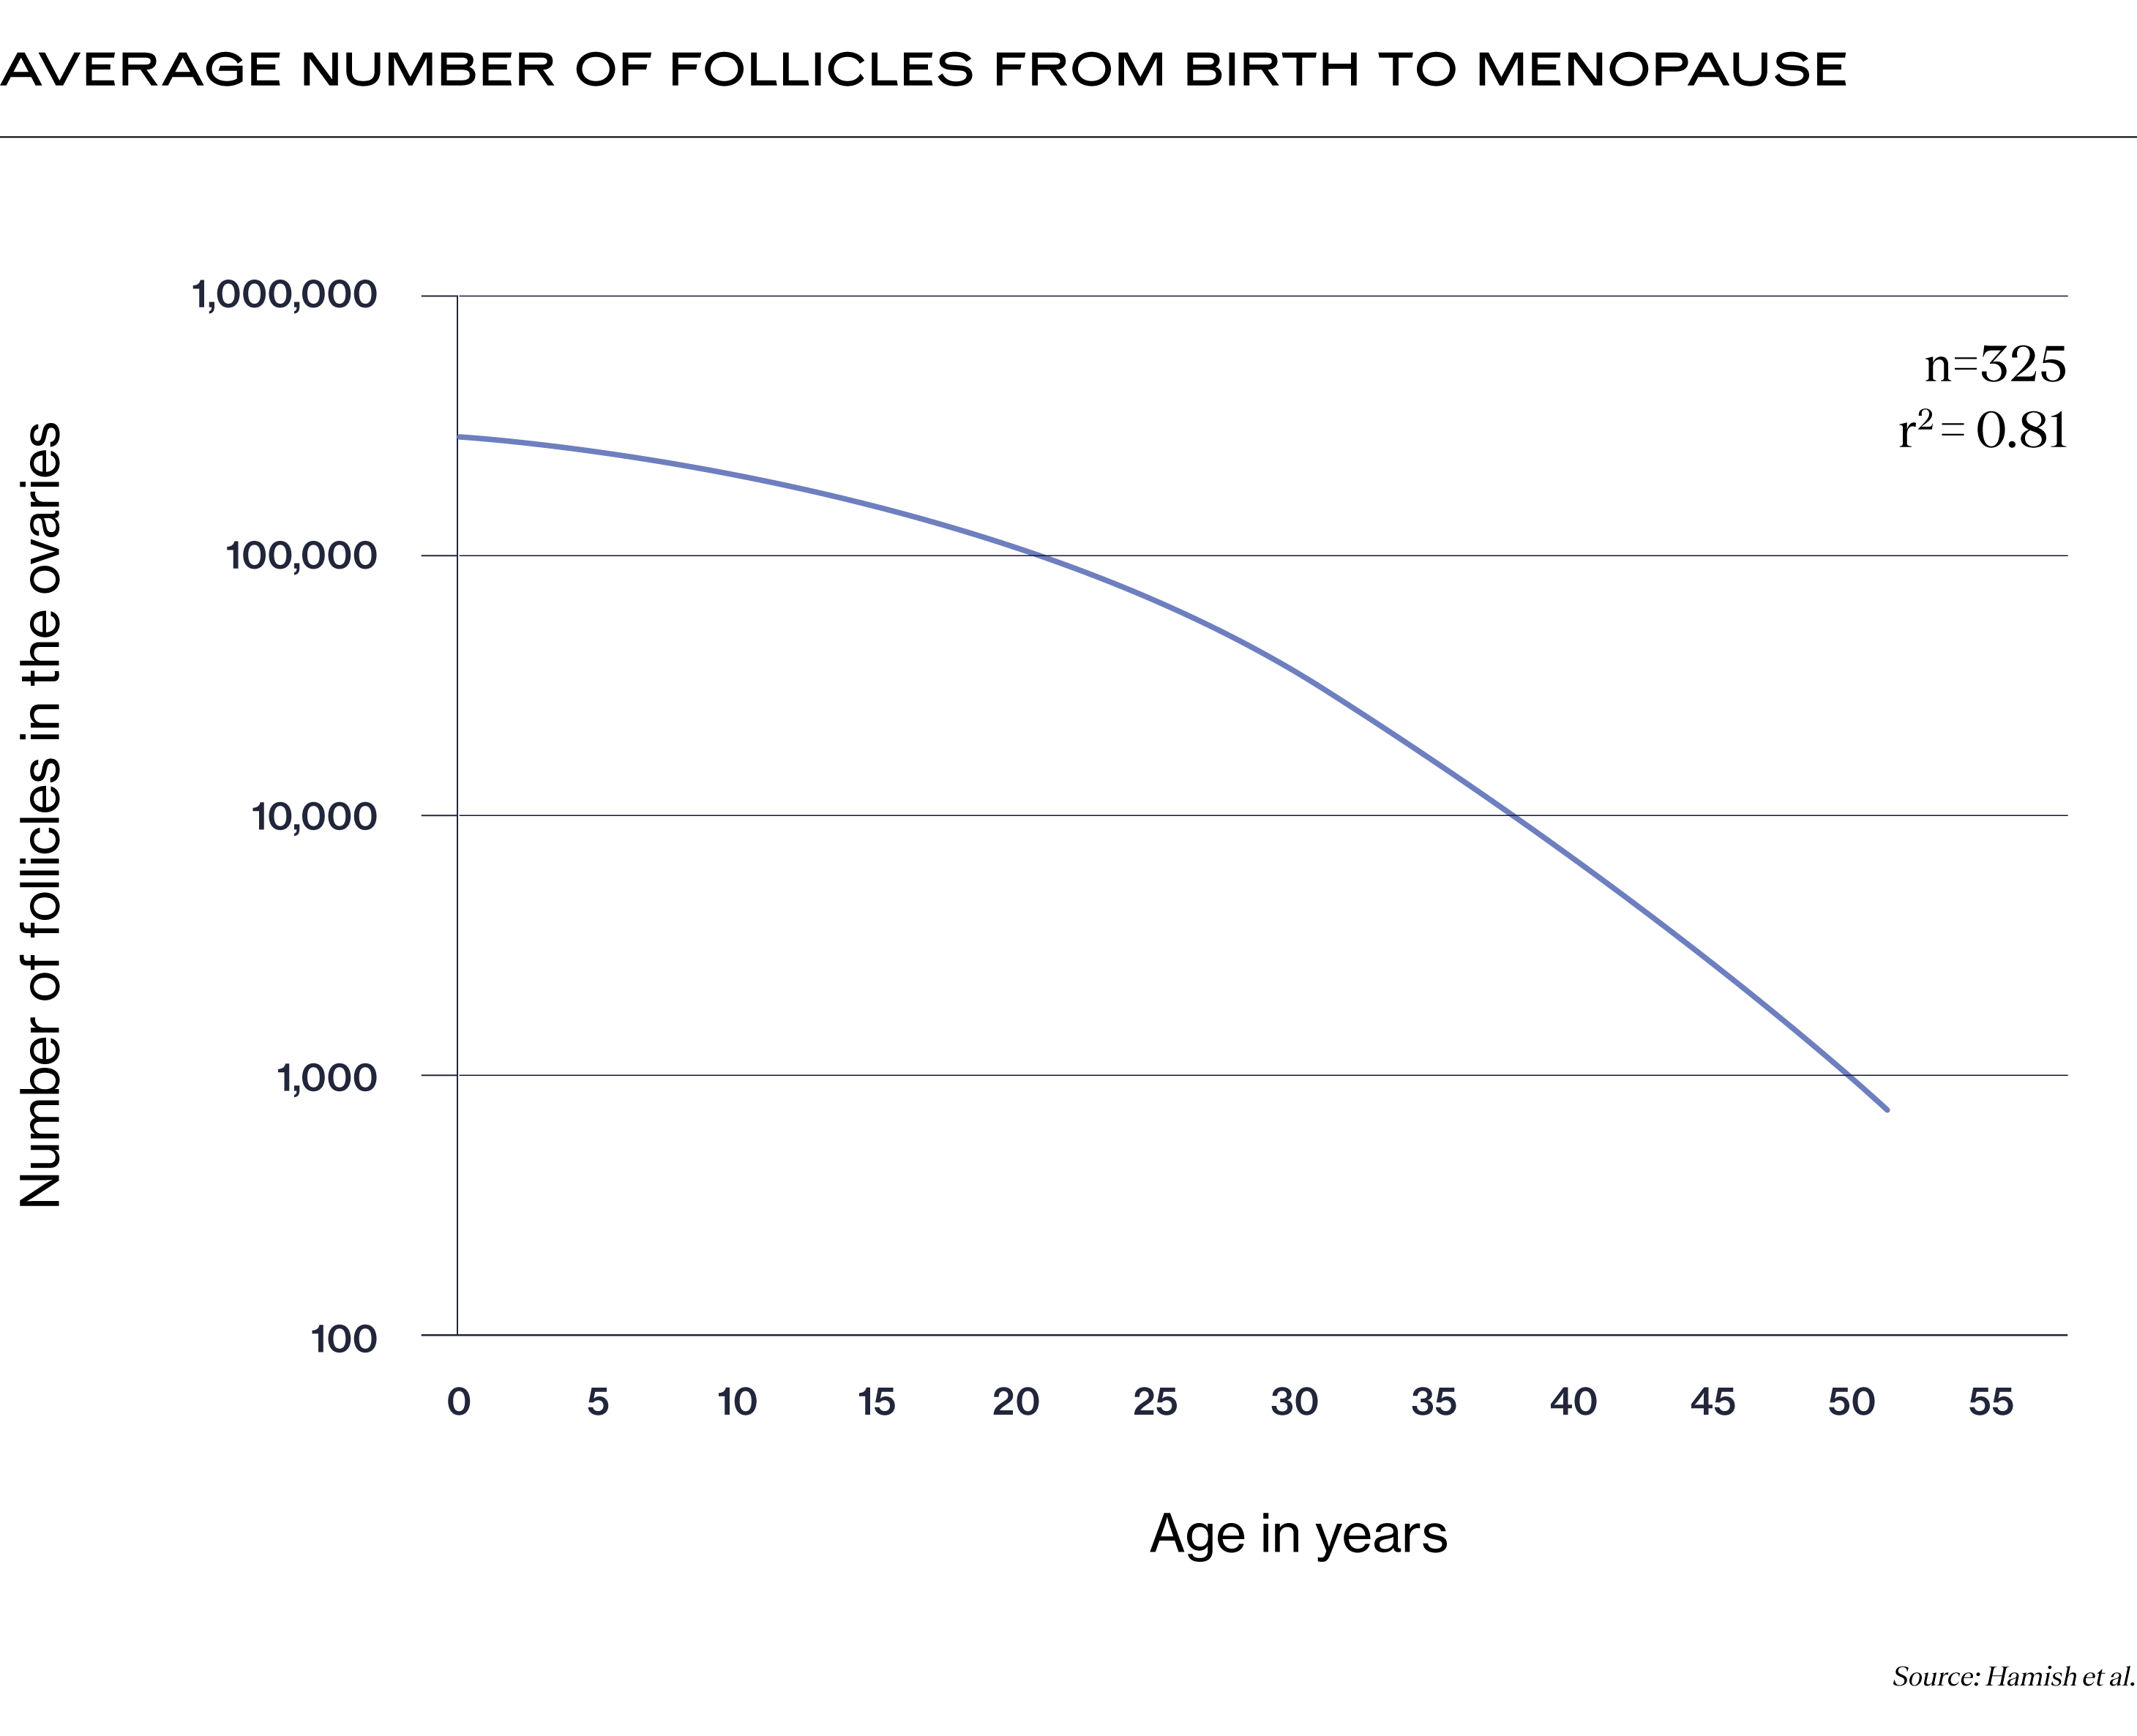 Average Number of Follicles from Birth to Menopause